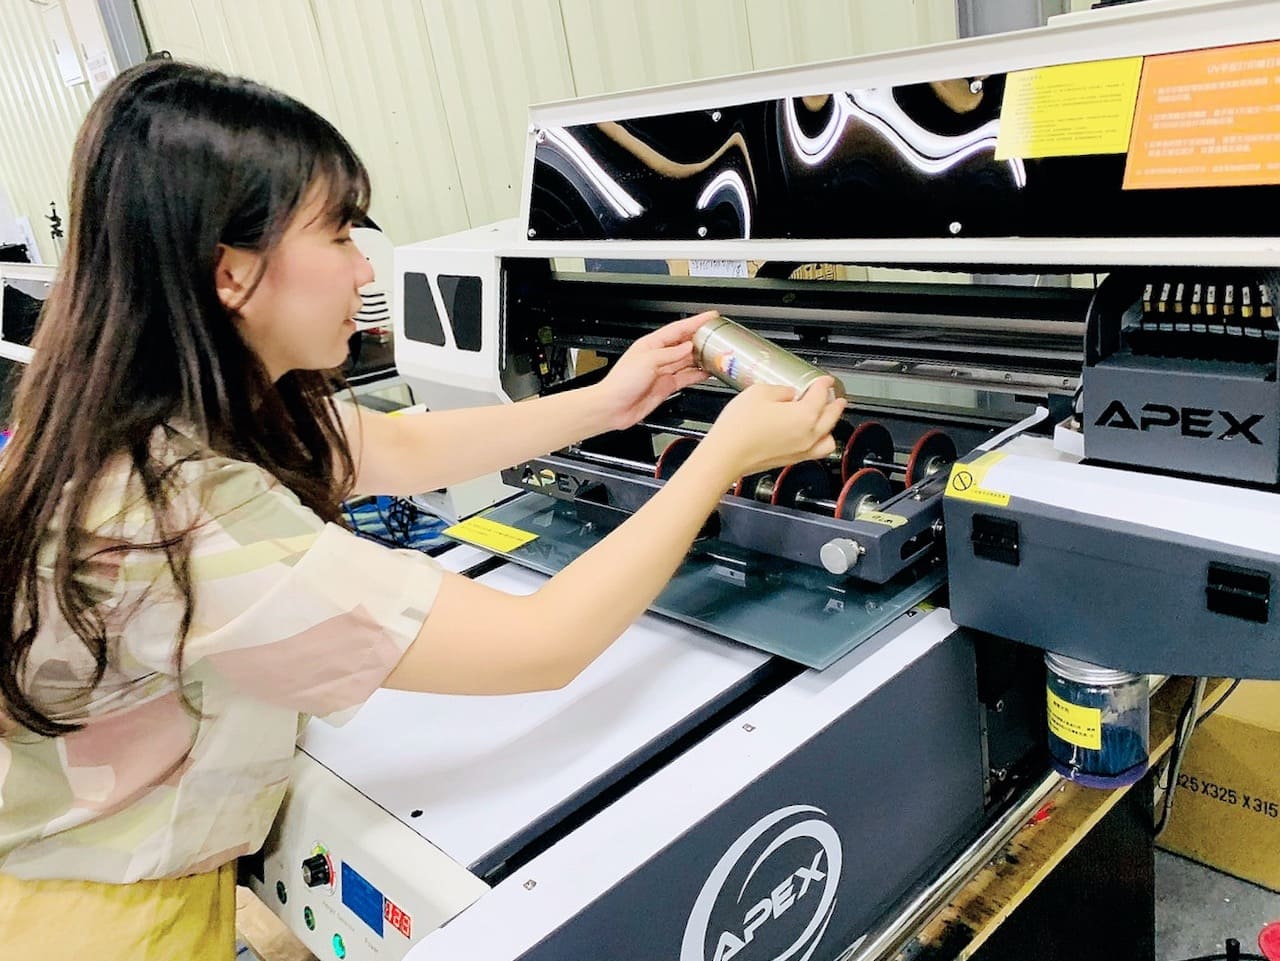 customize heat press and uv printing experience by catalina 23